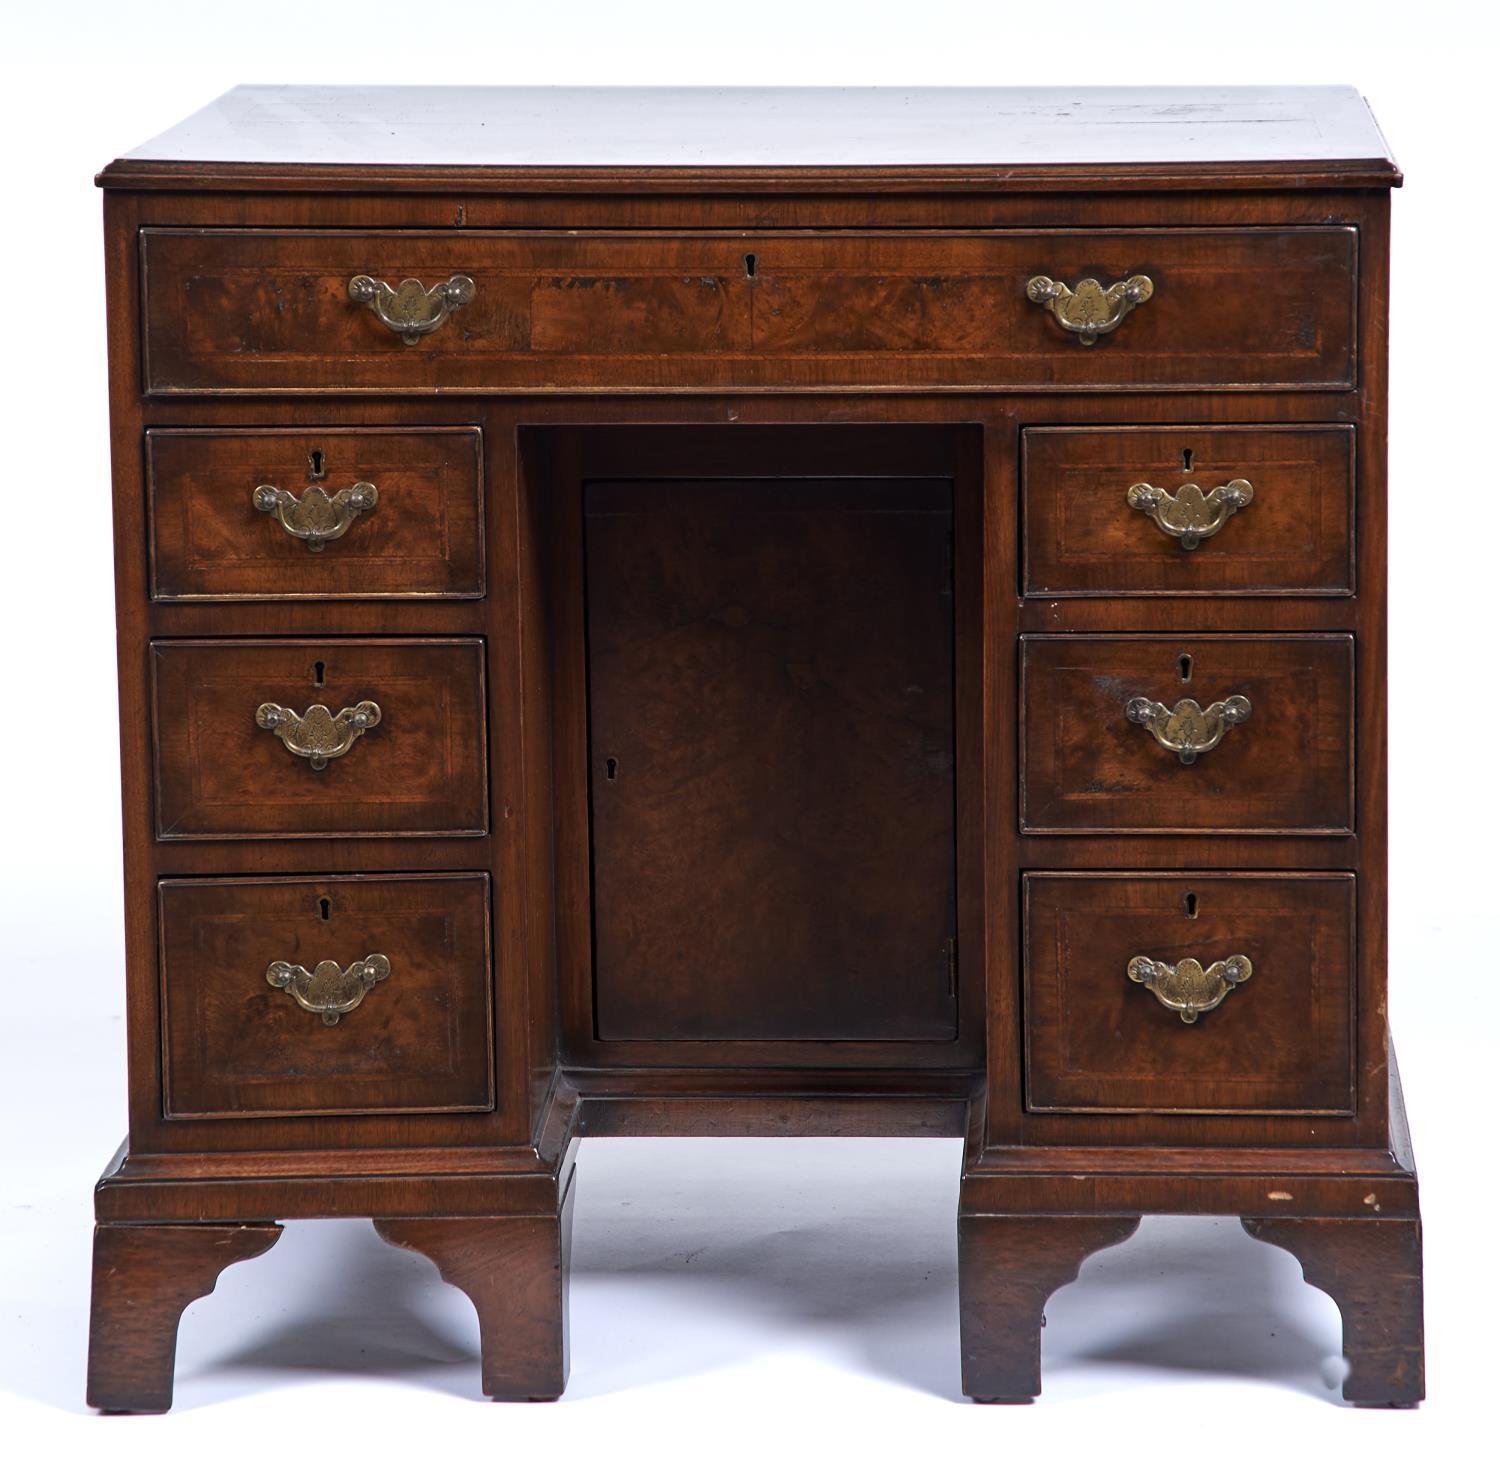 A REPRODUCTION BURR WALNUT VENEERED KNEEHOLE DESK IN GEORGE II STYLE, MID 20TH C, THE RECTANGULAR